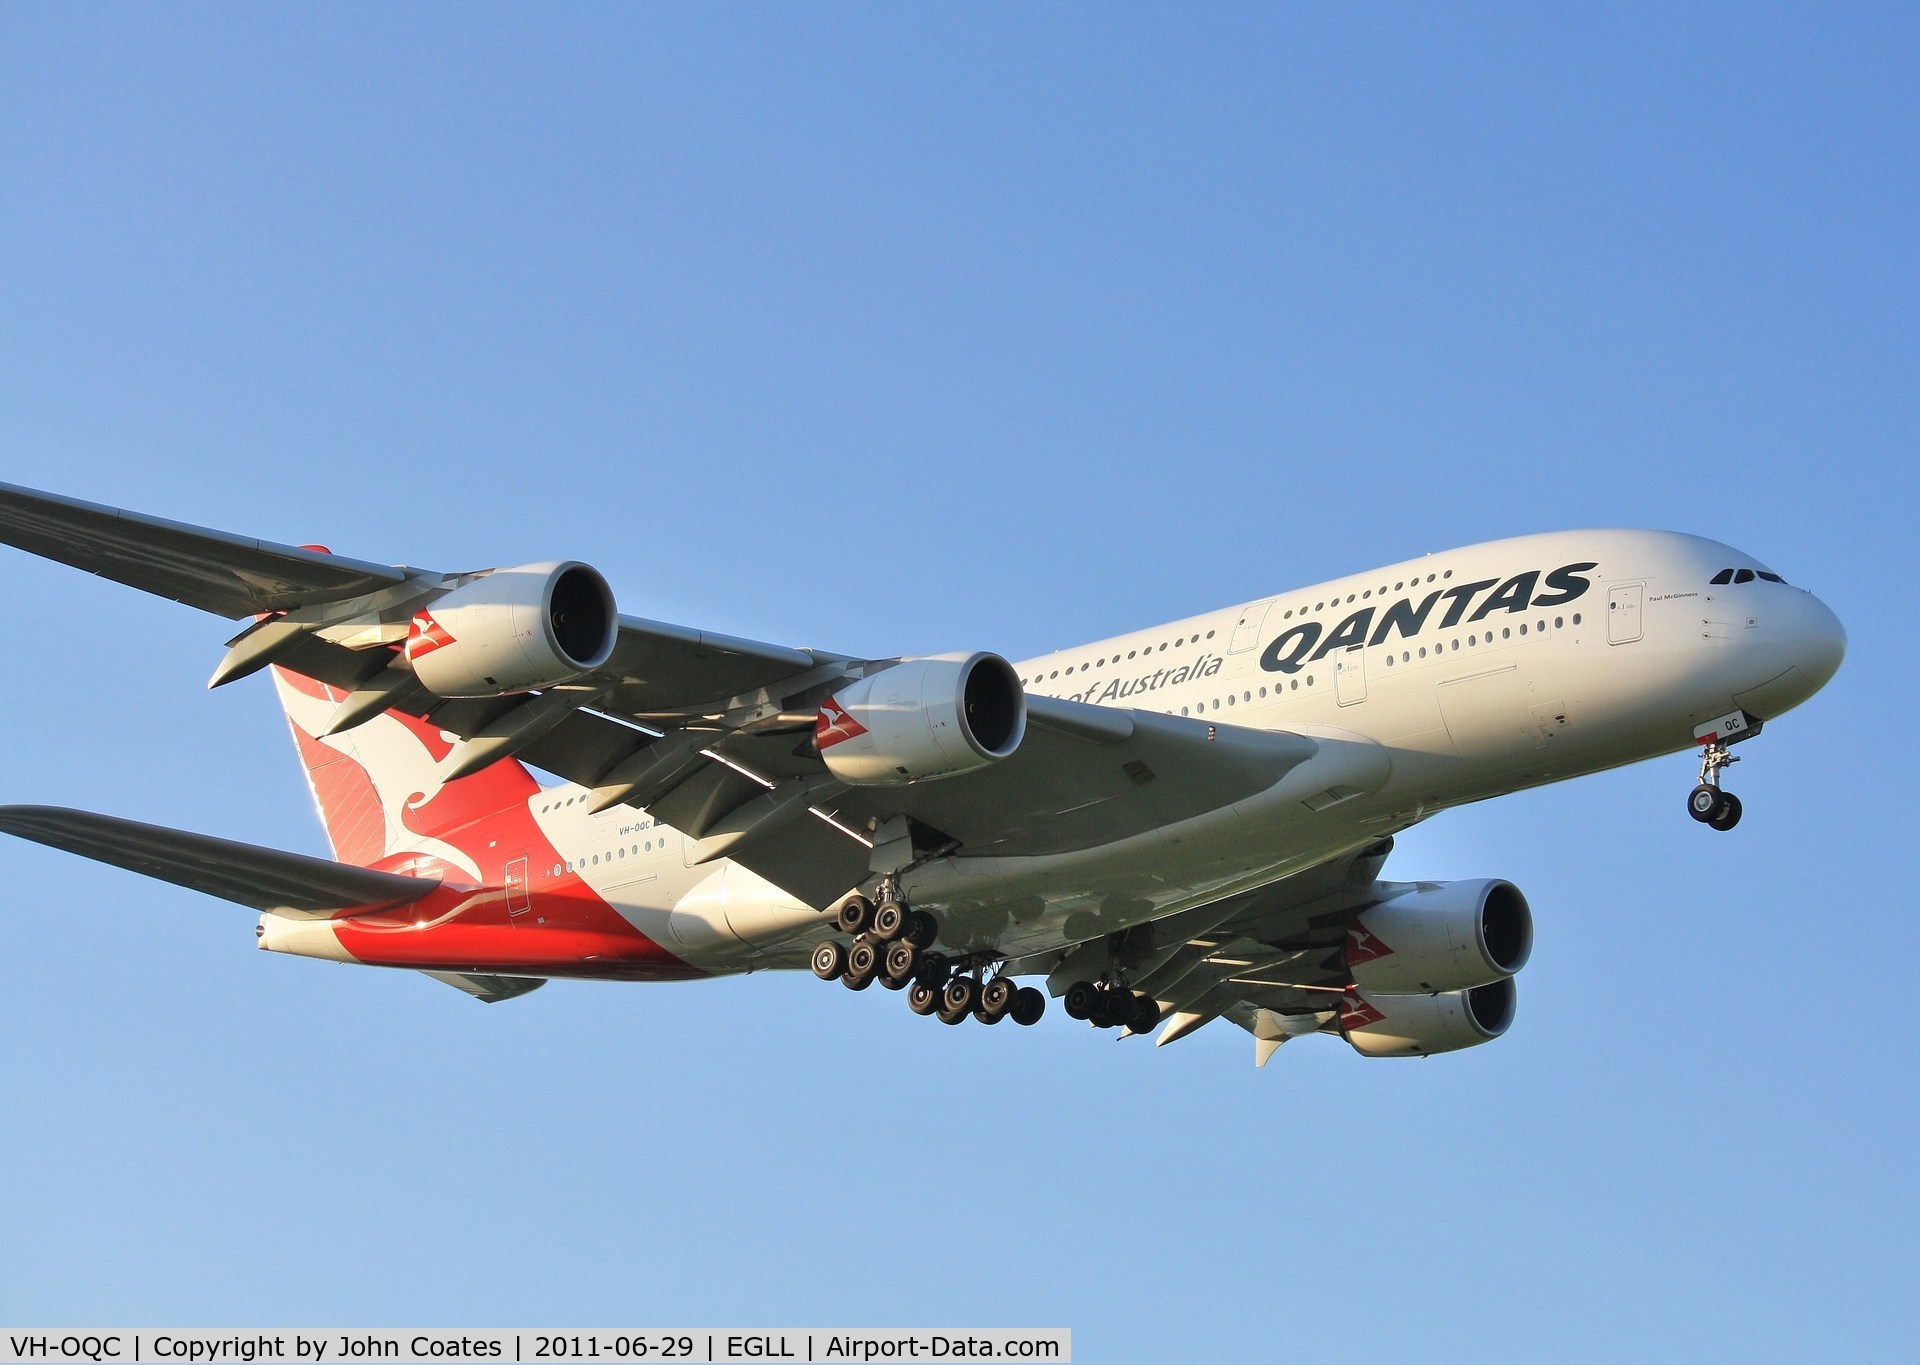 VH-OQC, 2008 Airbus A380-842 C/N 022, Finals to 27L